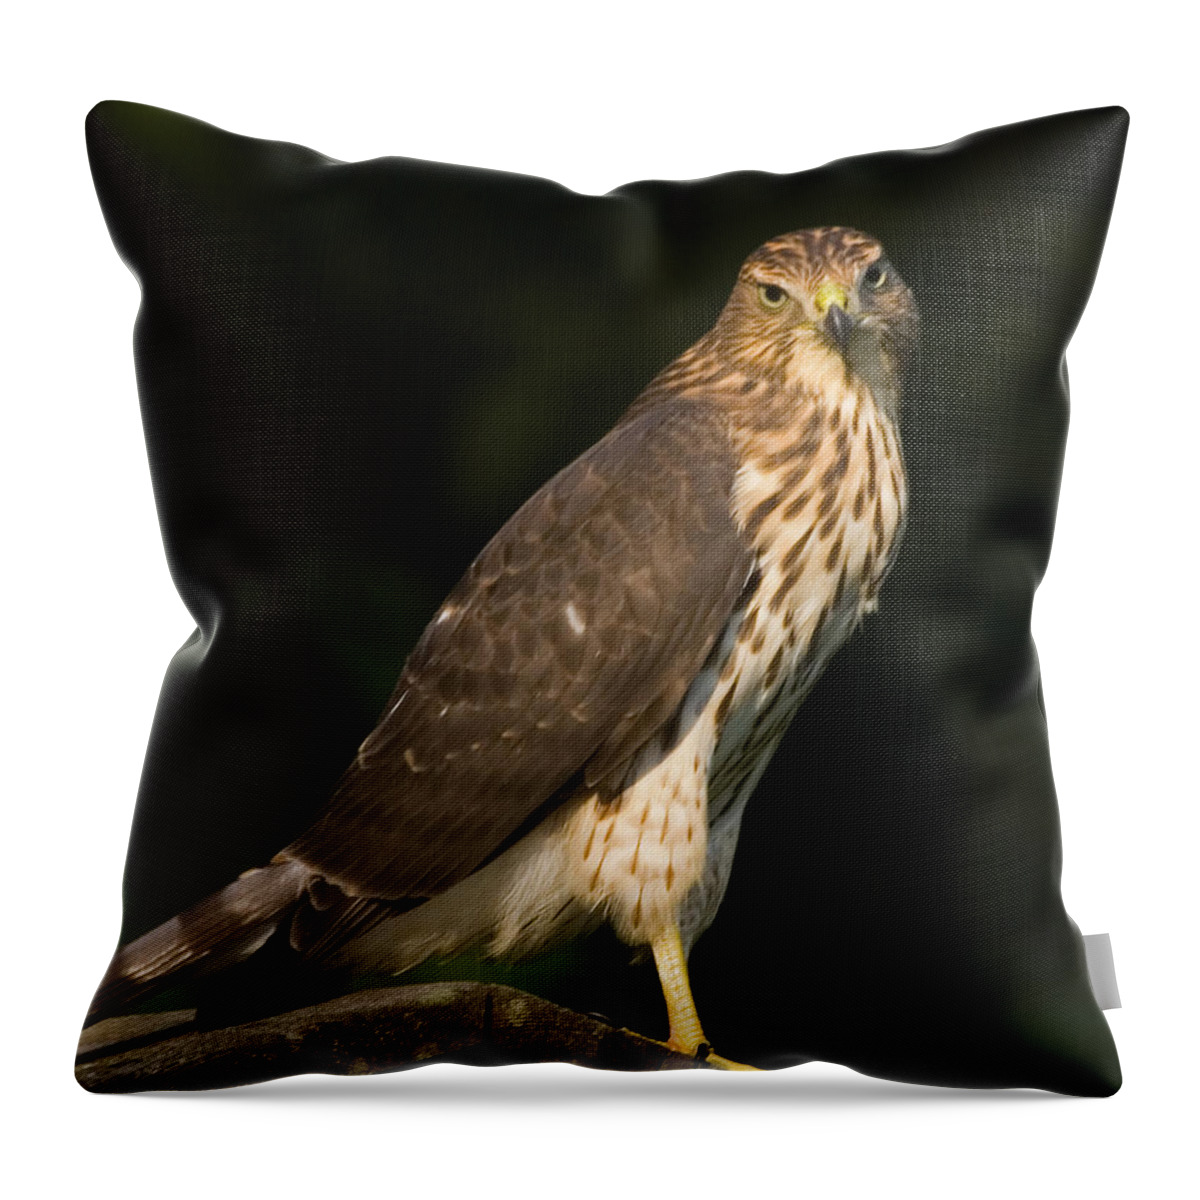 Hawk Throw Pillow featuring the photograph Coopers Hawk by Frank Winters